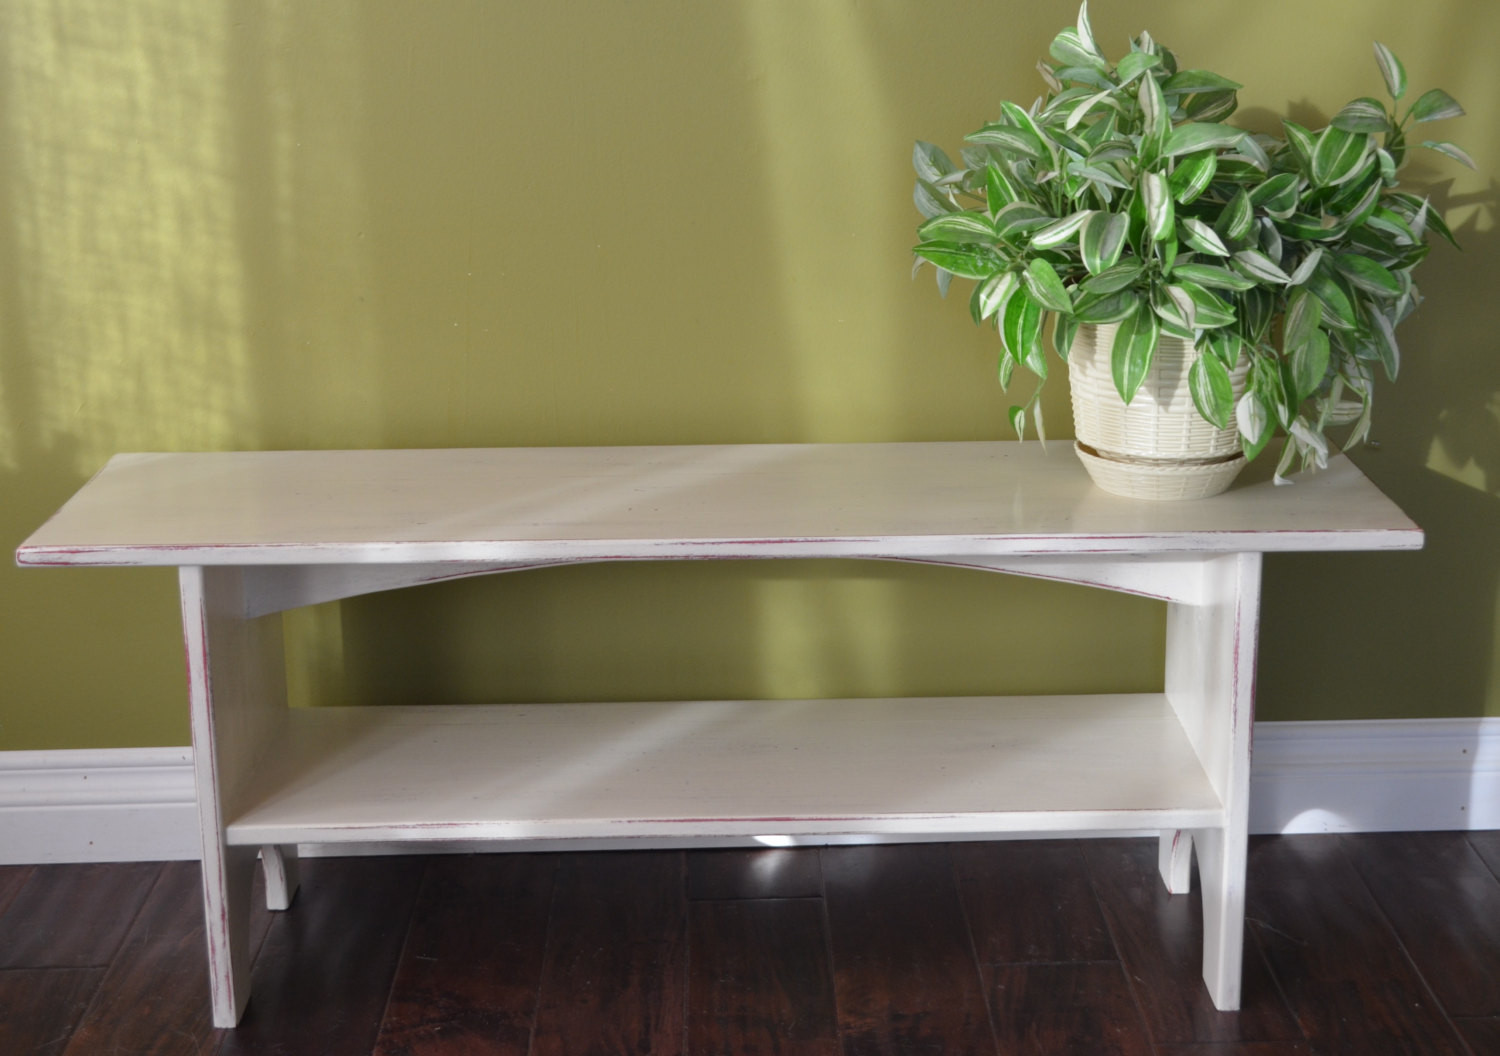 Sitting Bench With Storage
 Antiqued Sitting Bench Storage Bench Entryway Bench in